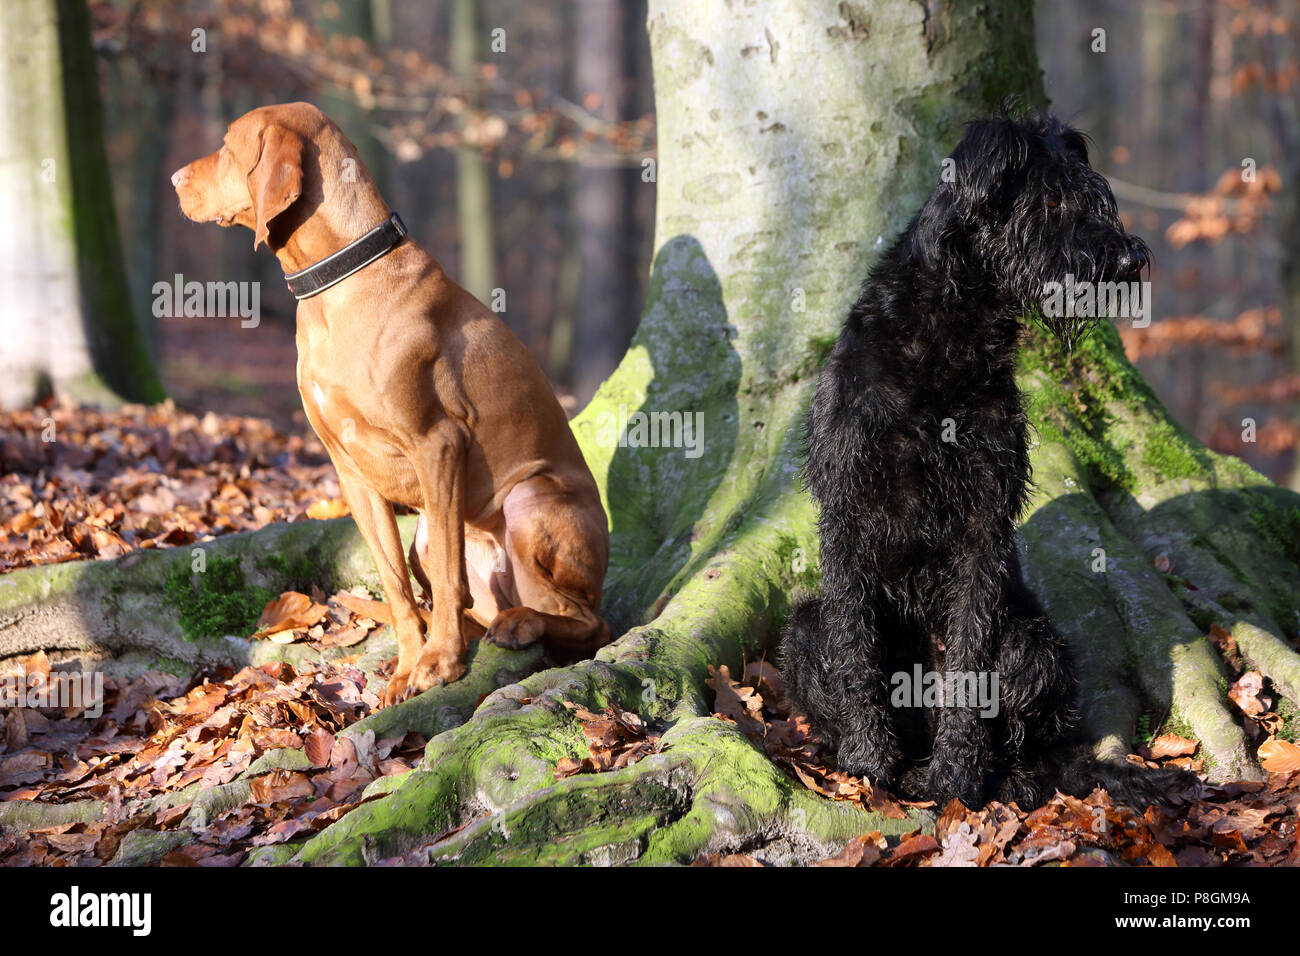 Berlin, Germany, Magyar Vizsla (left) and giant schnauzers sit on a tree facing away from each other in the woods Stock Photo